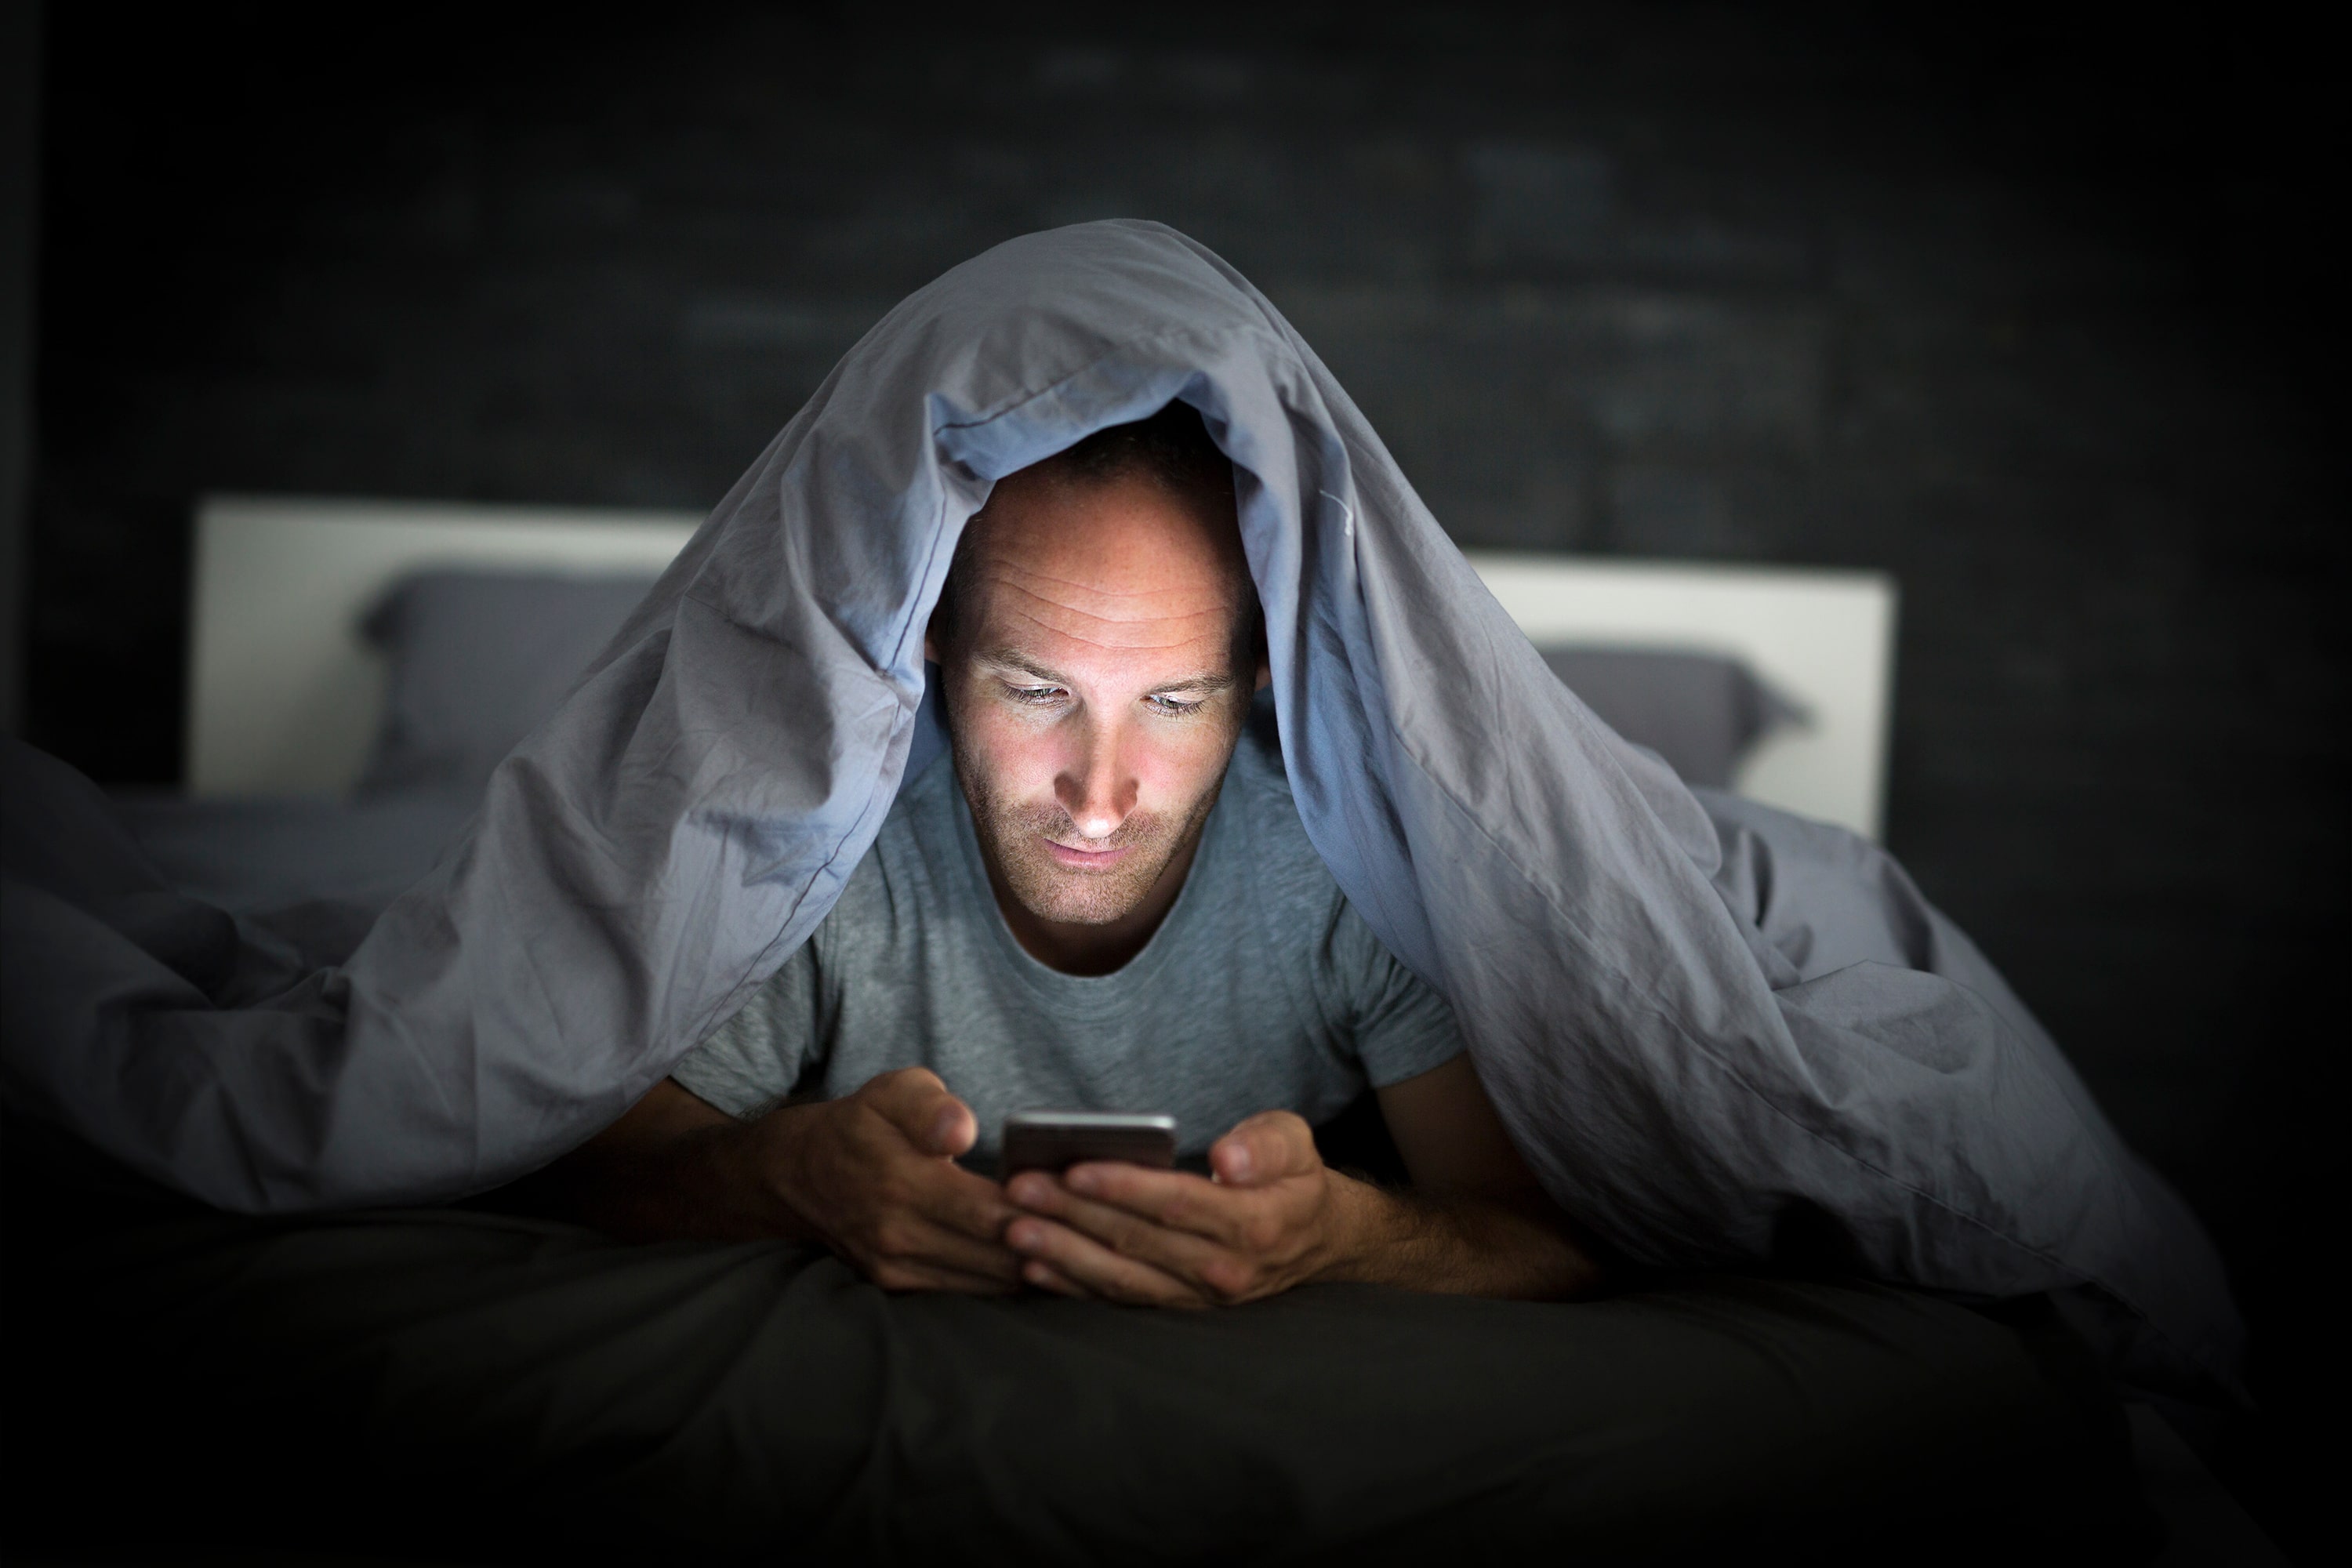 A man burrowed under his duvet in bed while scrolling through social media on his smartphone.